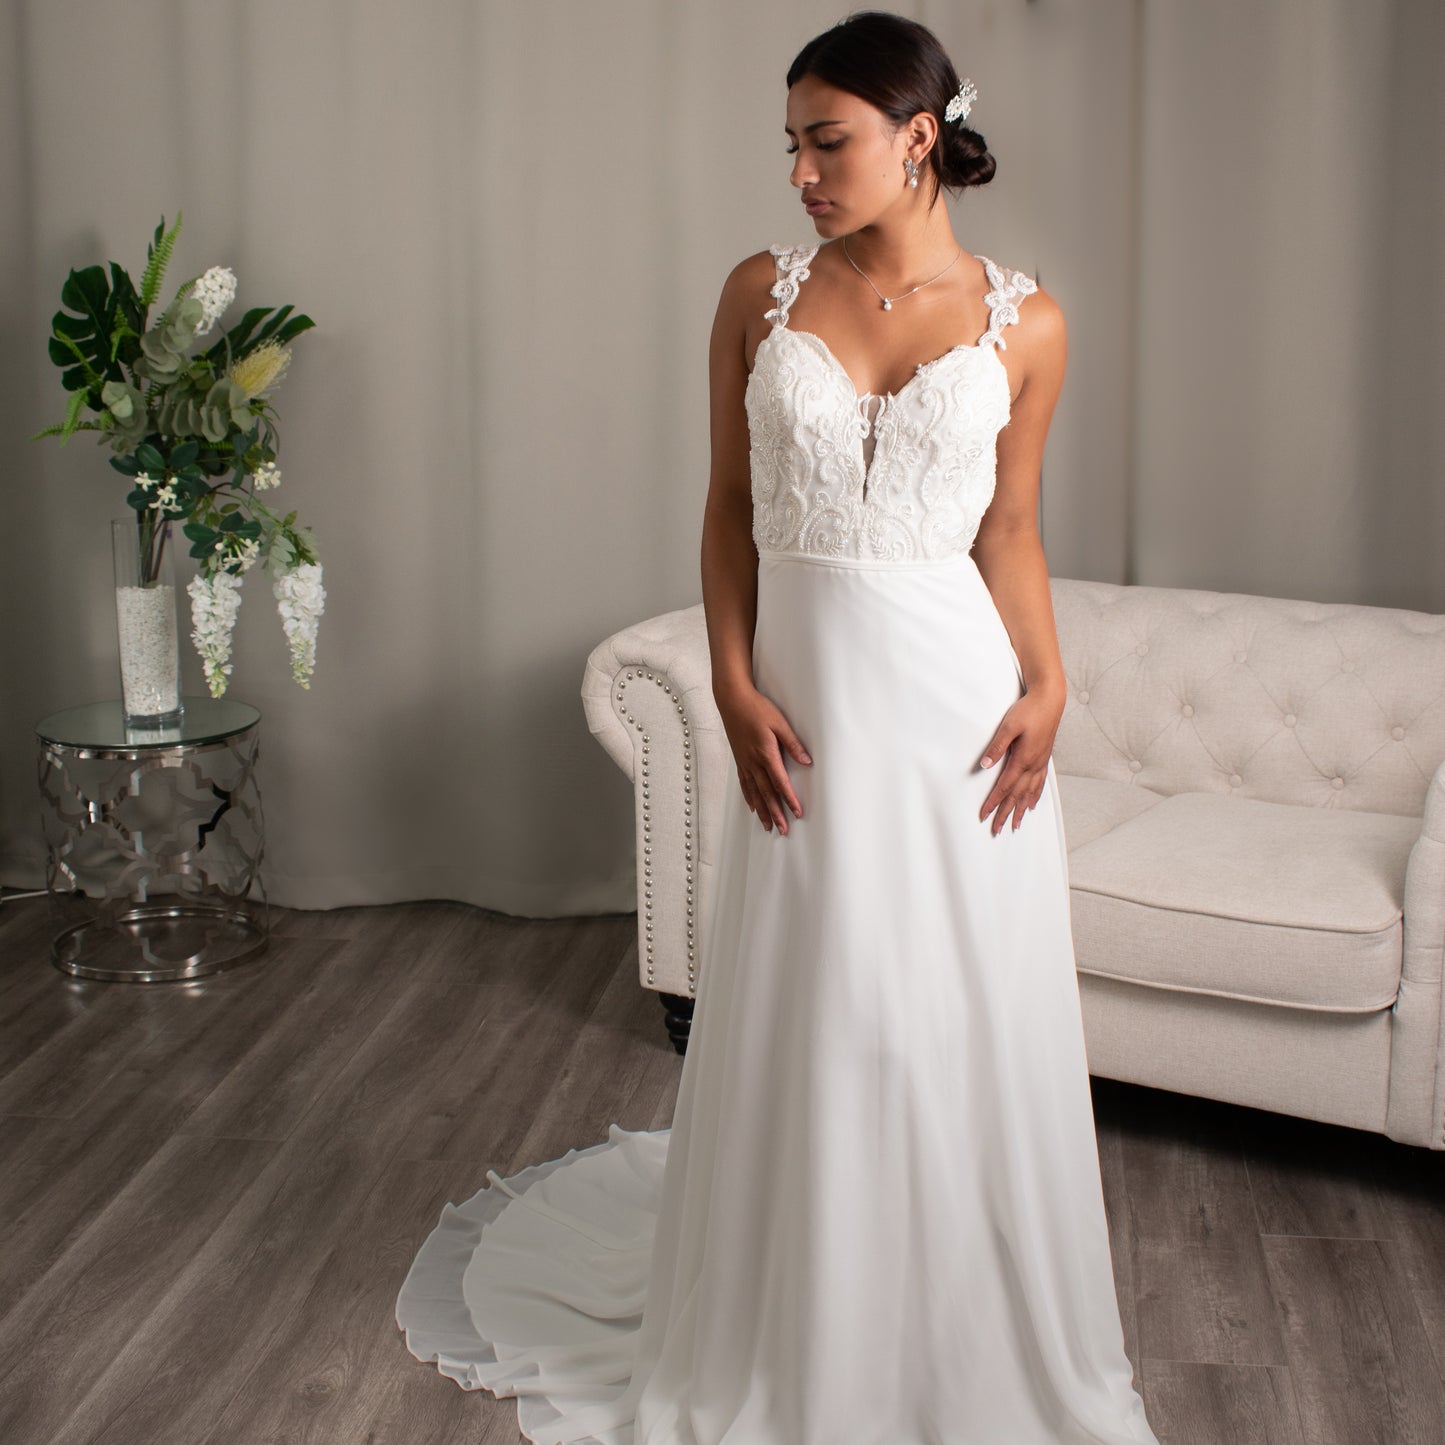 Evelyn A-line Bridal Gown with Lace Bodice by Divine Bridal.